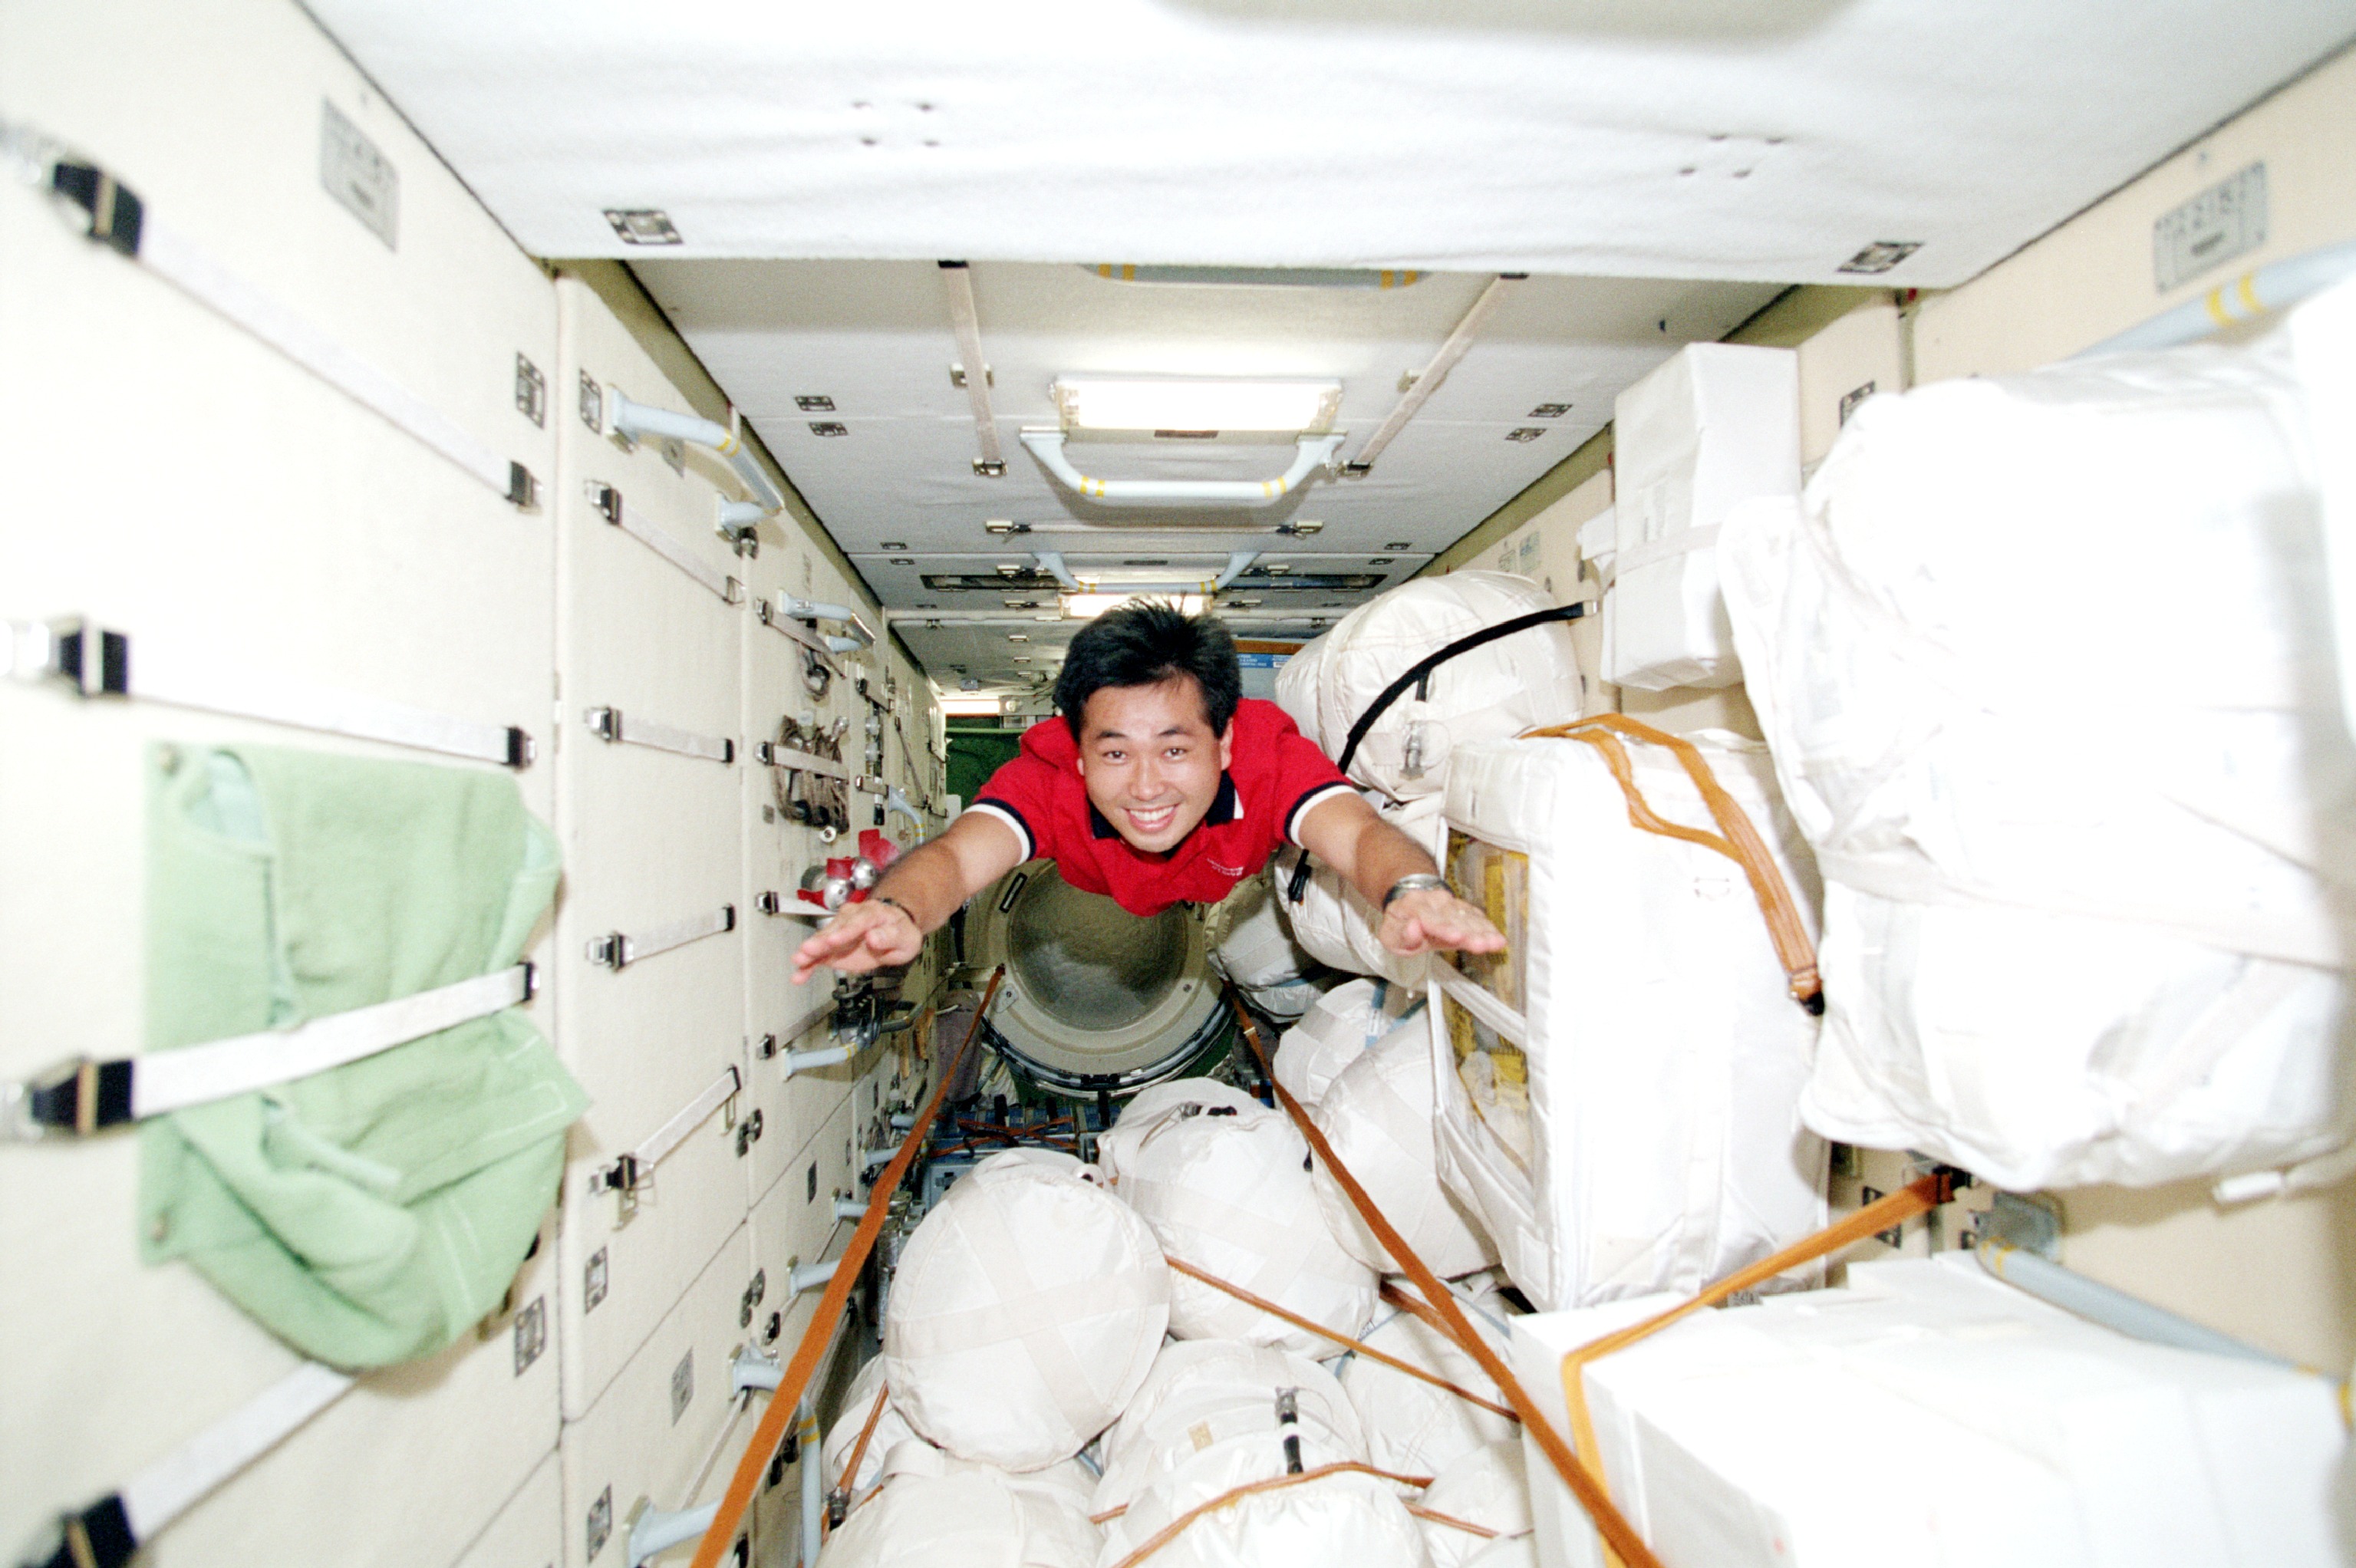 On STS-92 in October 2000, Koichi Wakata became the first Japanese to board the International Space Station (ISS) in orbit. He is now its first Japanese commander. Photo Credit: NASA